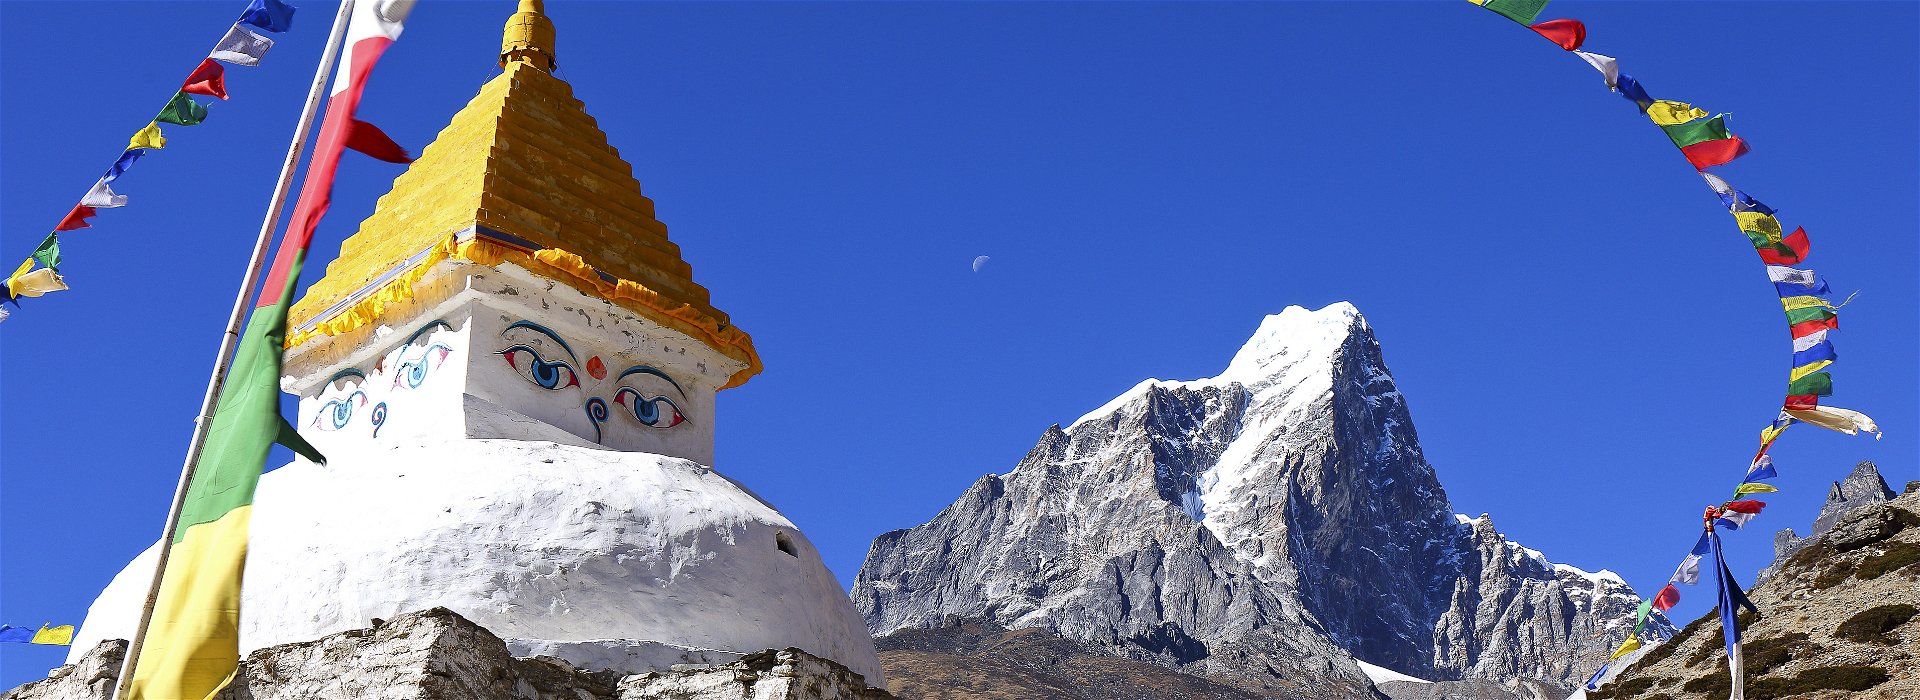 How to Trek to Everest Basecamp for Charity